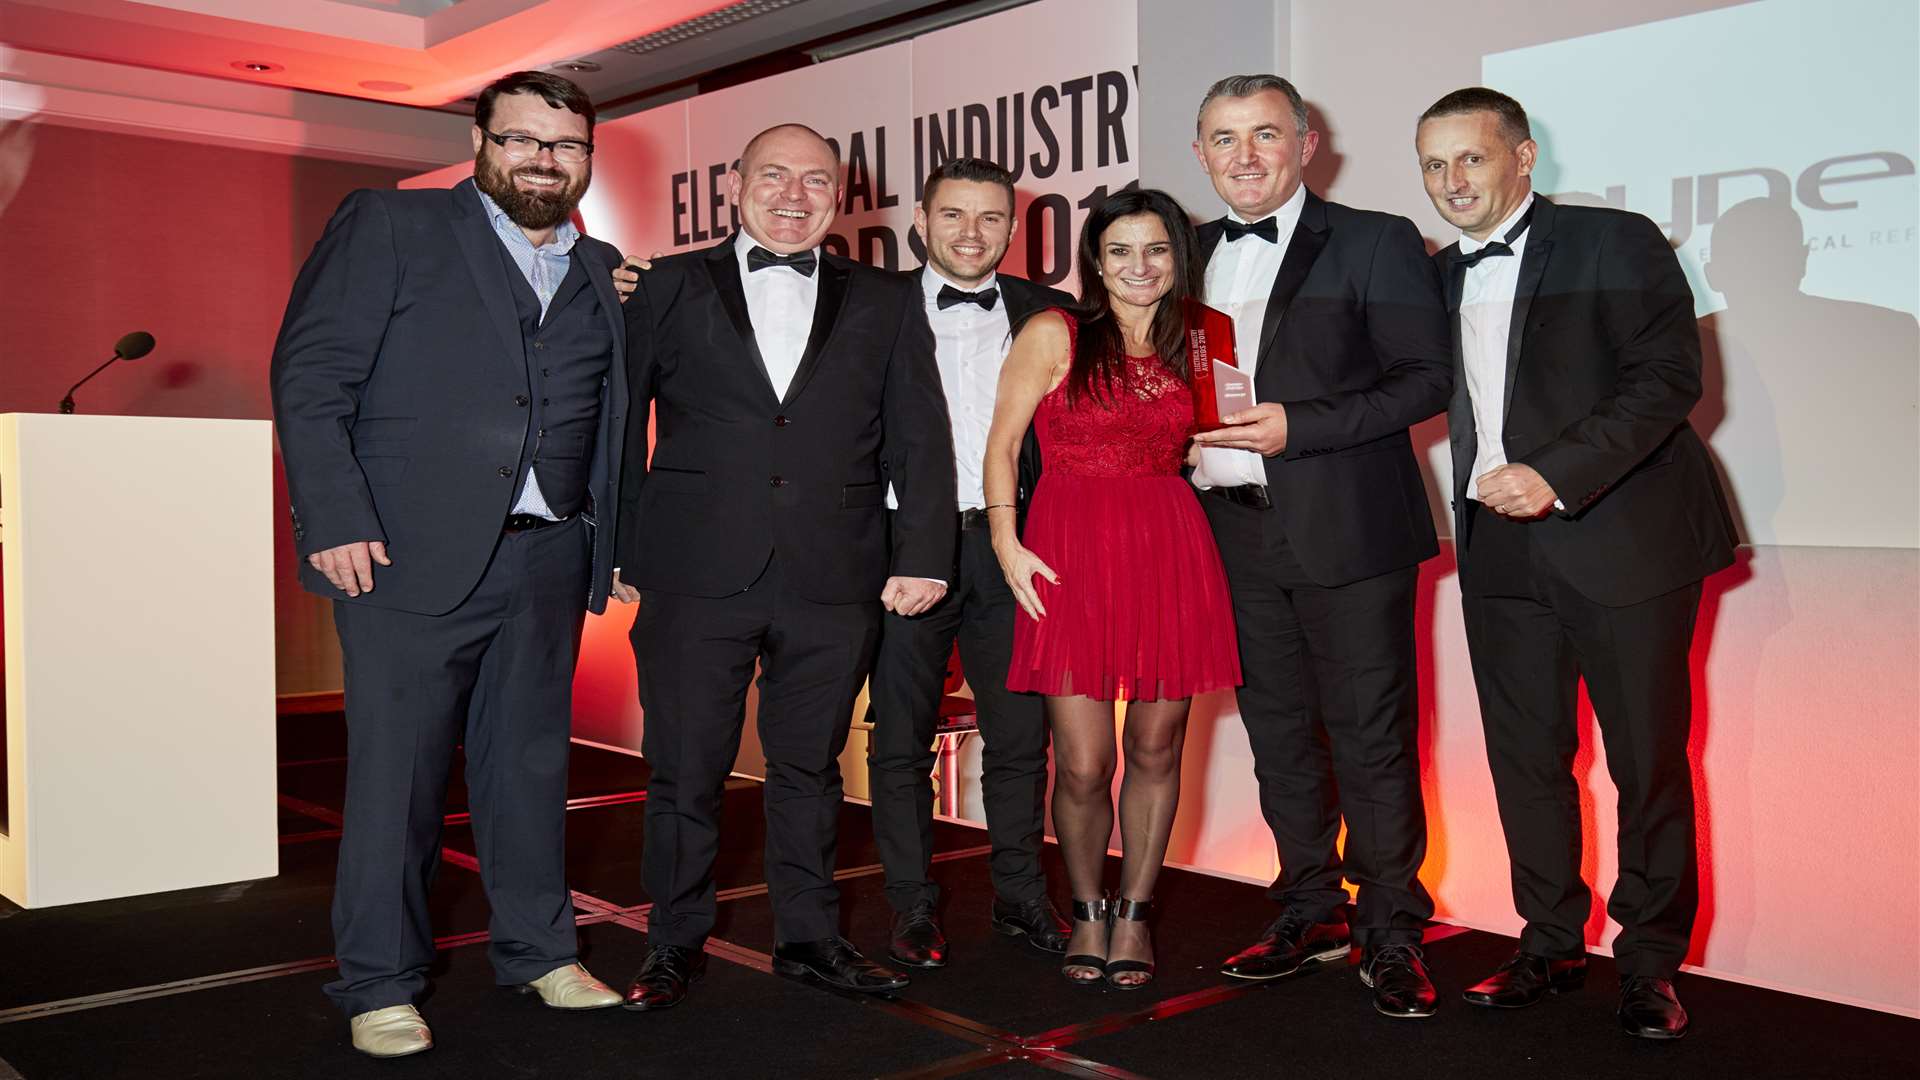 Synecore is named M&E contractor of the year at the Electrical Industry Awards